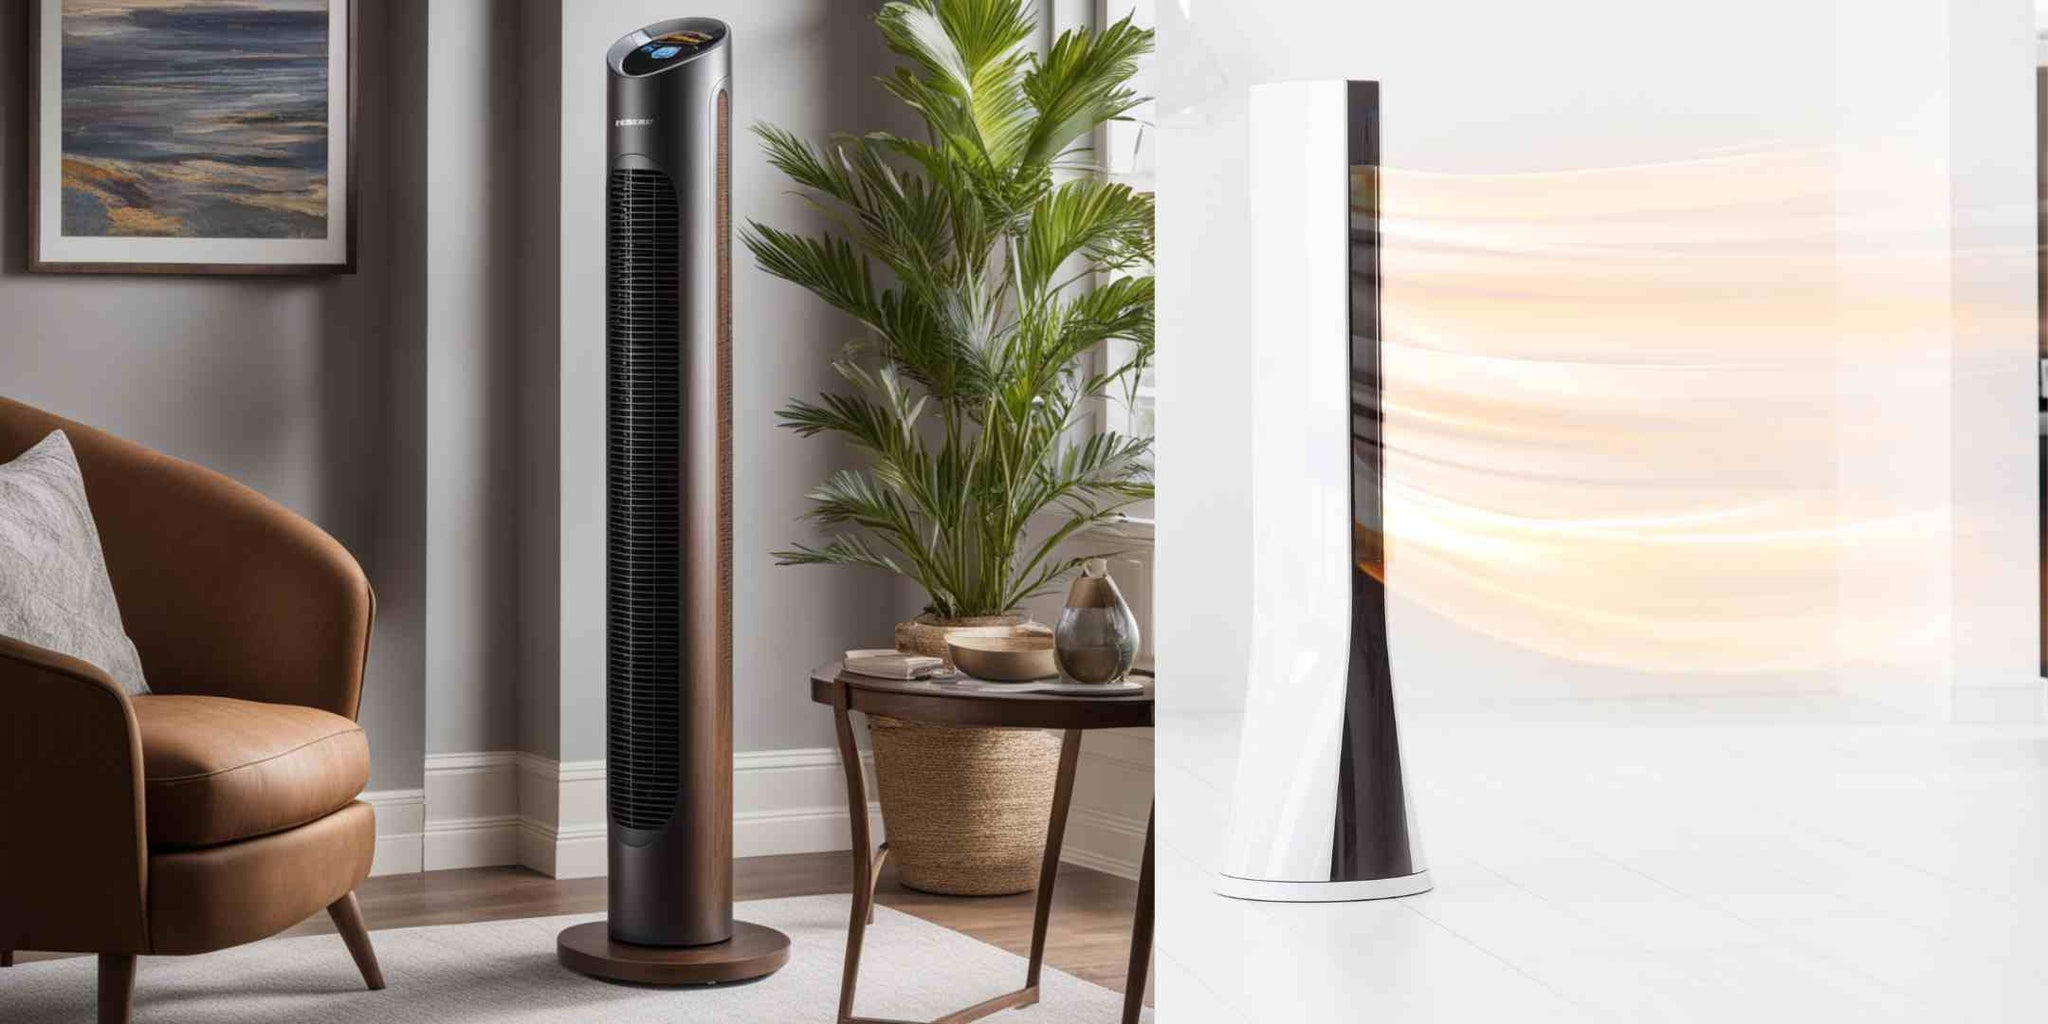 Christmas Gift Idea For Parents Who Are Environmentally-Conscious-Tower Fans Singapore